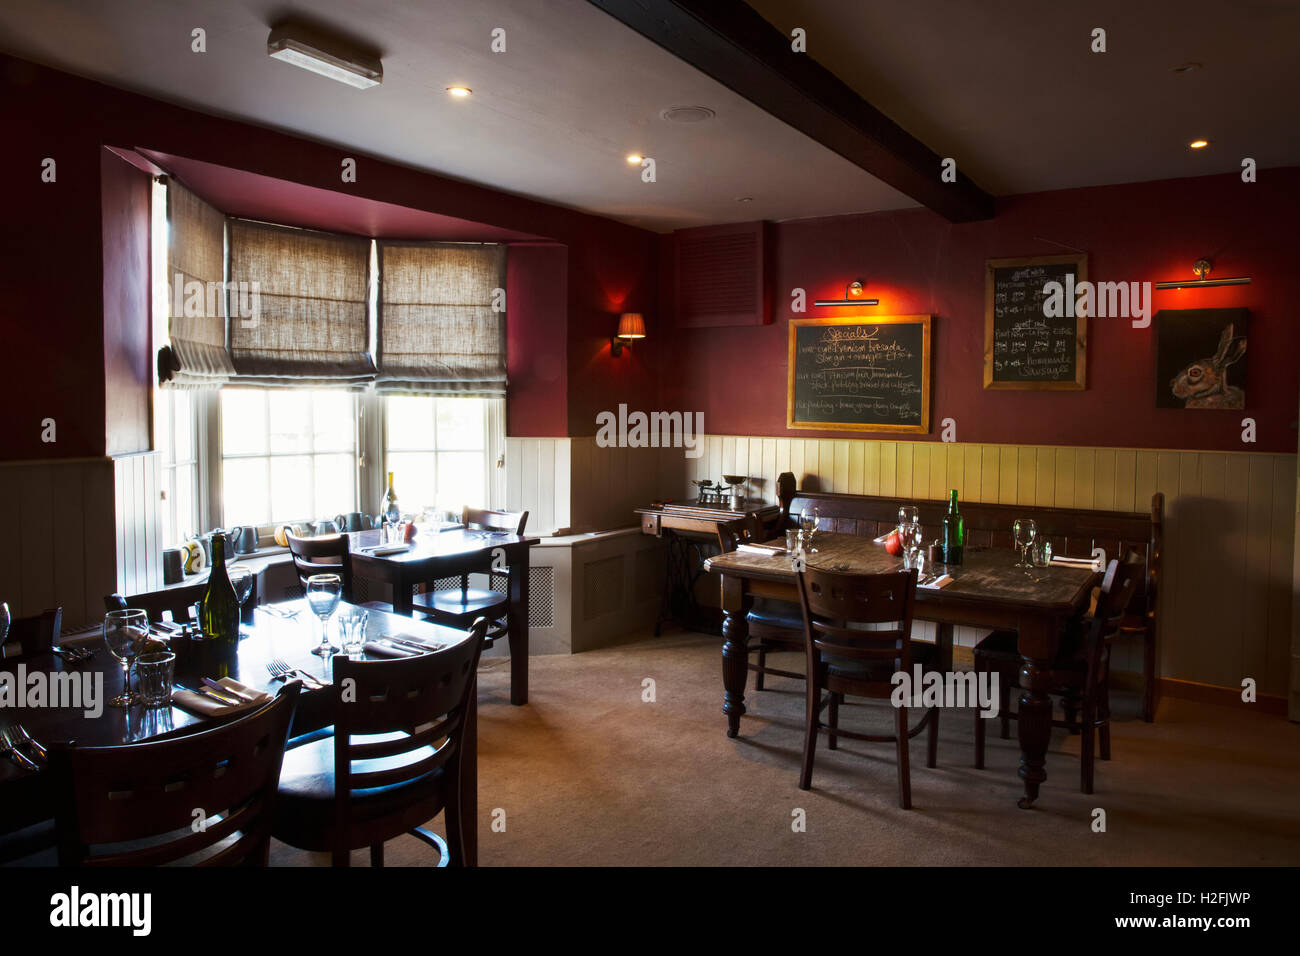 Village public house interior. Tables laid for dinner. Stock Photo